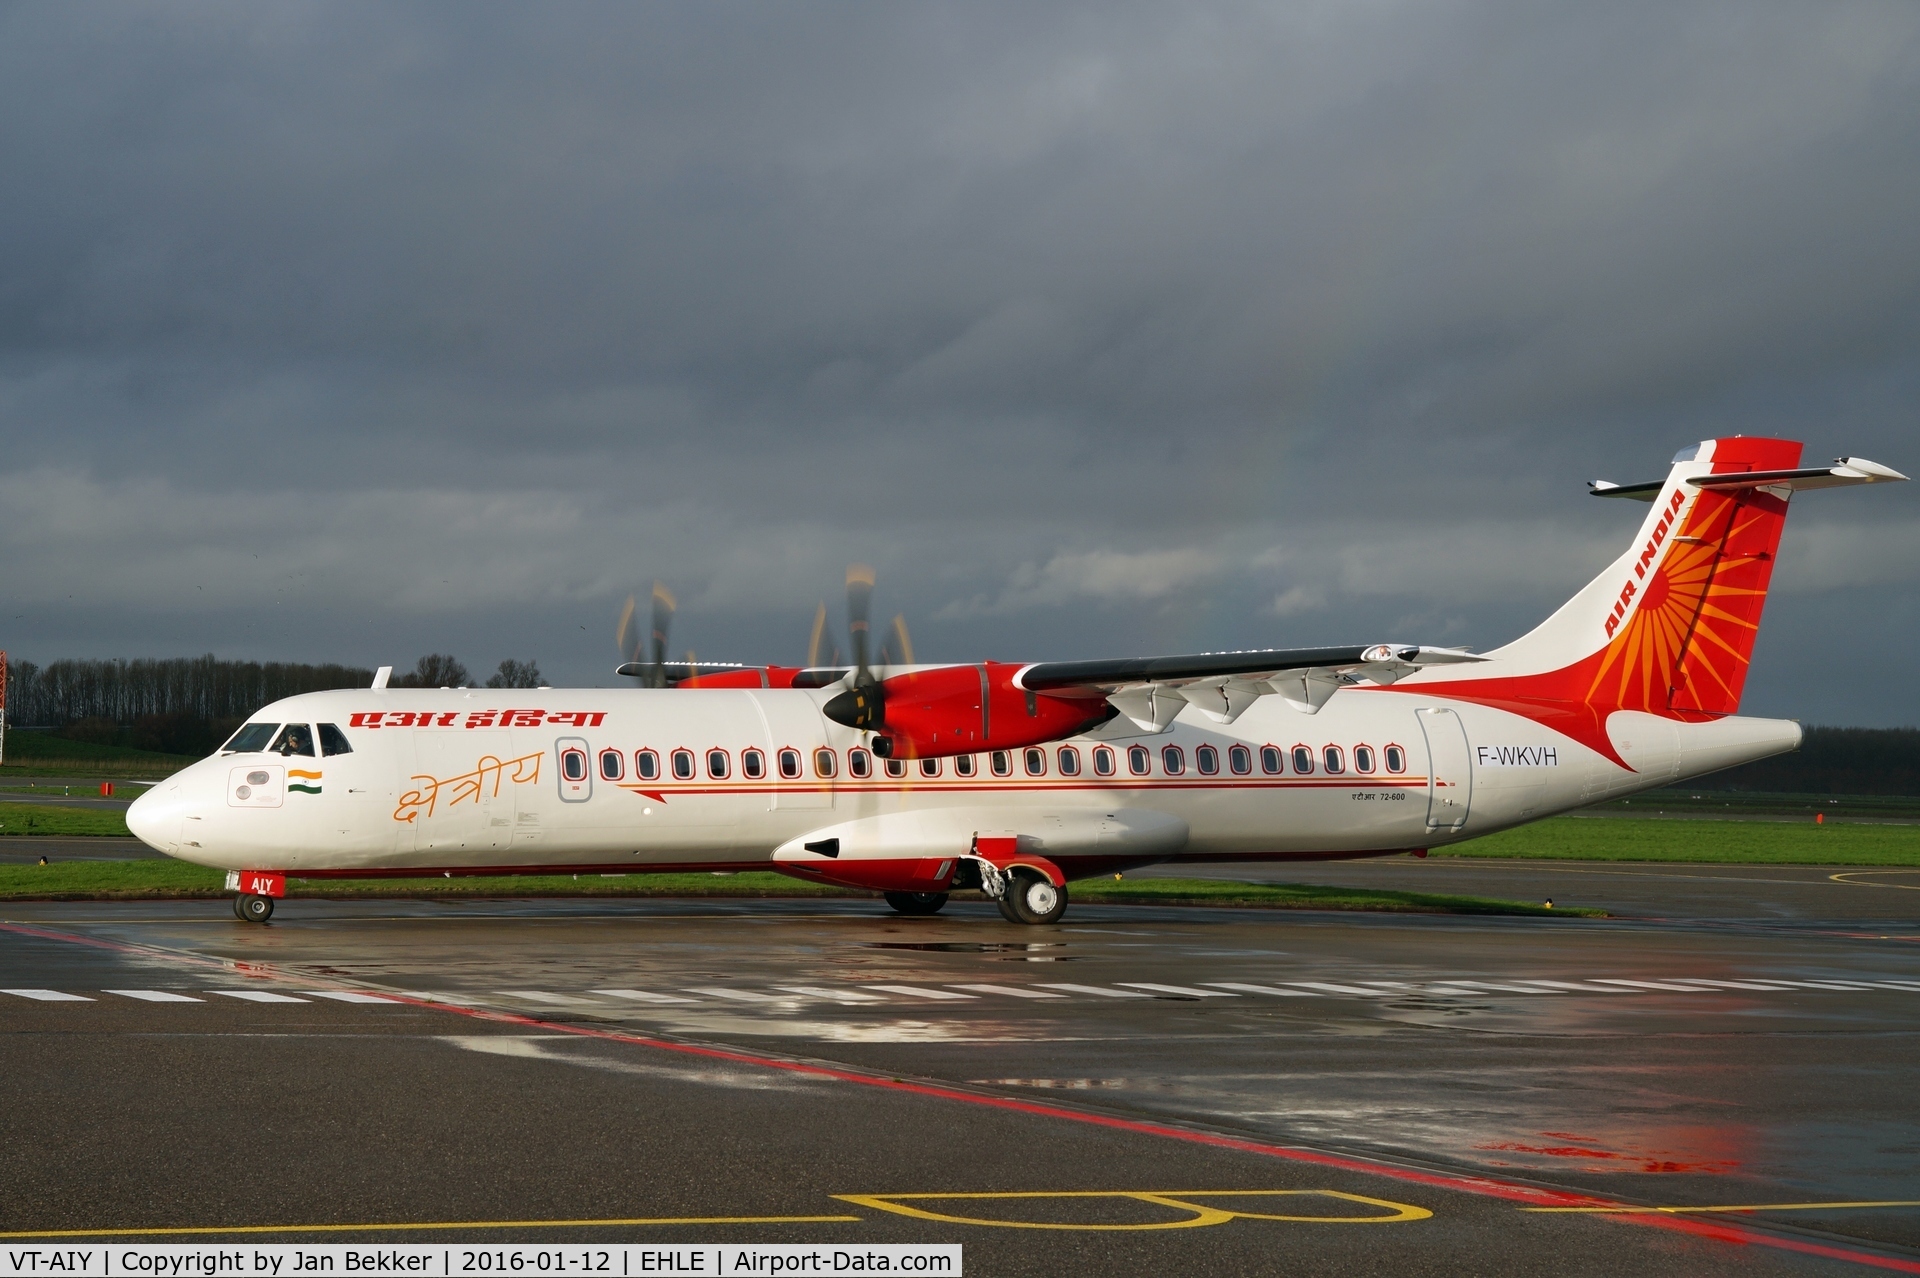 VT-AIY, 2015 ATR 72-600 (72-212A) C/N 1273, Just got is livery at Lelystad Airport (QAPS). Now in the colors of Air India Regional. The new registration is already on the nose gear doors.